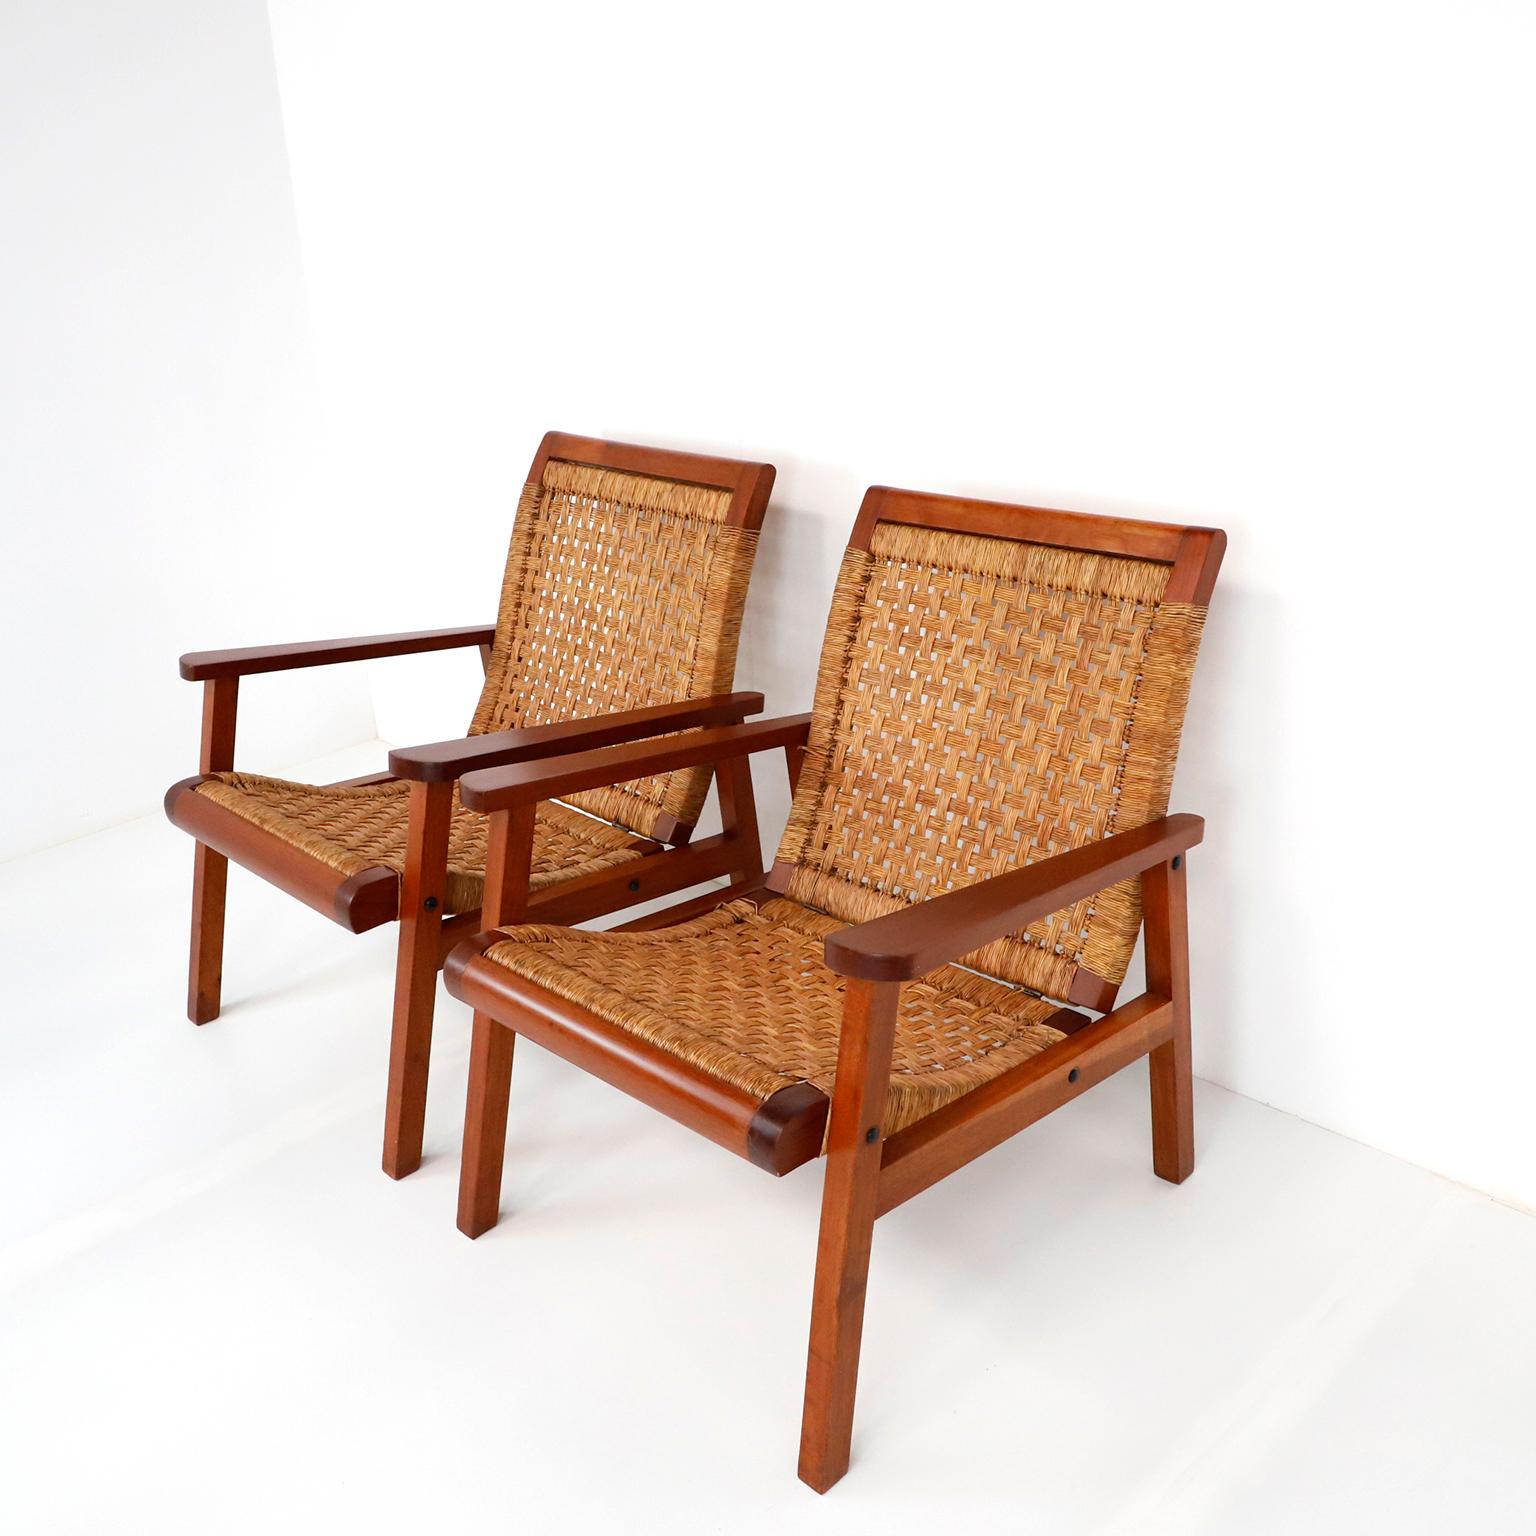 Pair of Mexican Mid-Century Modern woven lounge chairs made in the 1950s by Muebles Tropicales and retailed by J. L. Legoretta, Mexico City, Mexico. Featuring simple but elegant modern frames and a curvaceous seat, this chair provides a surprising